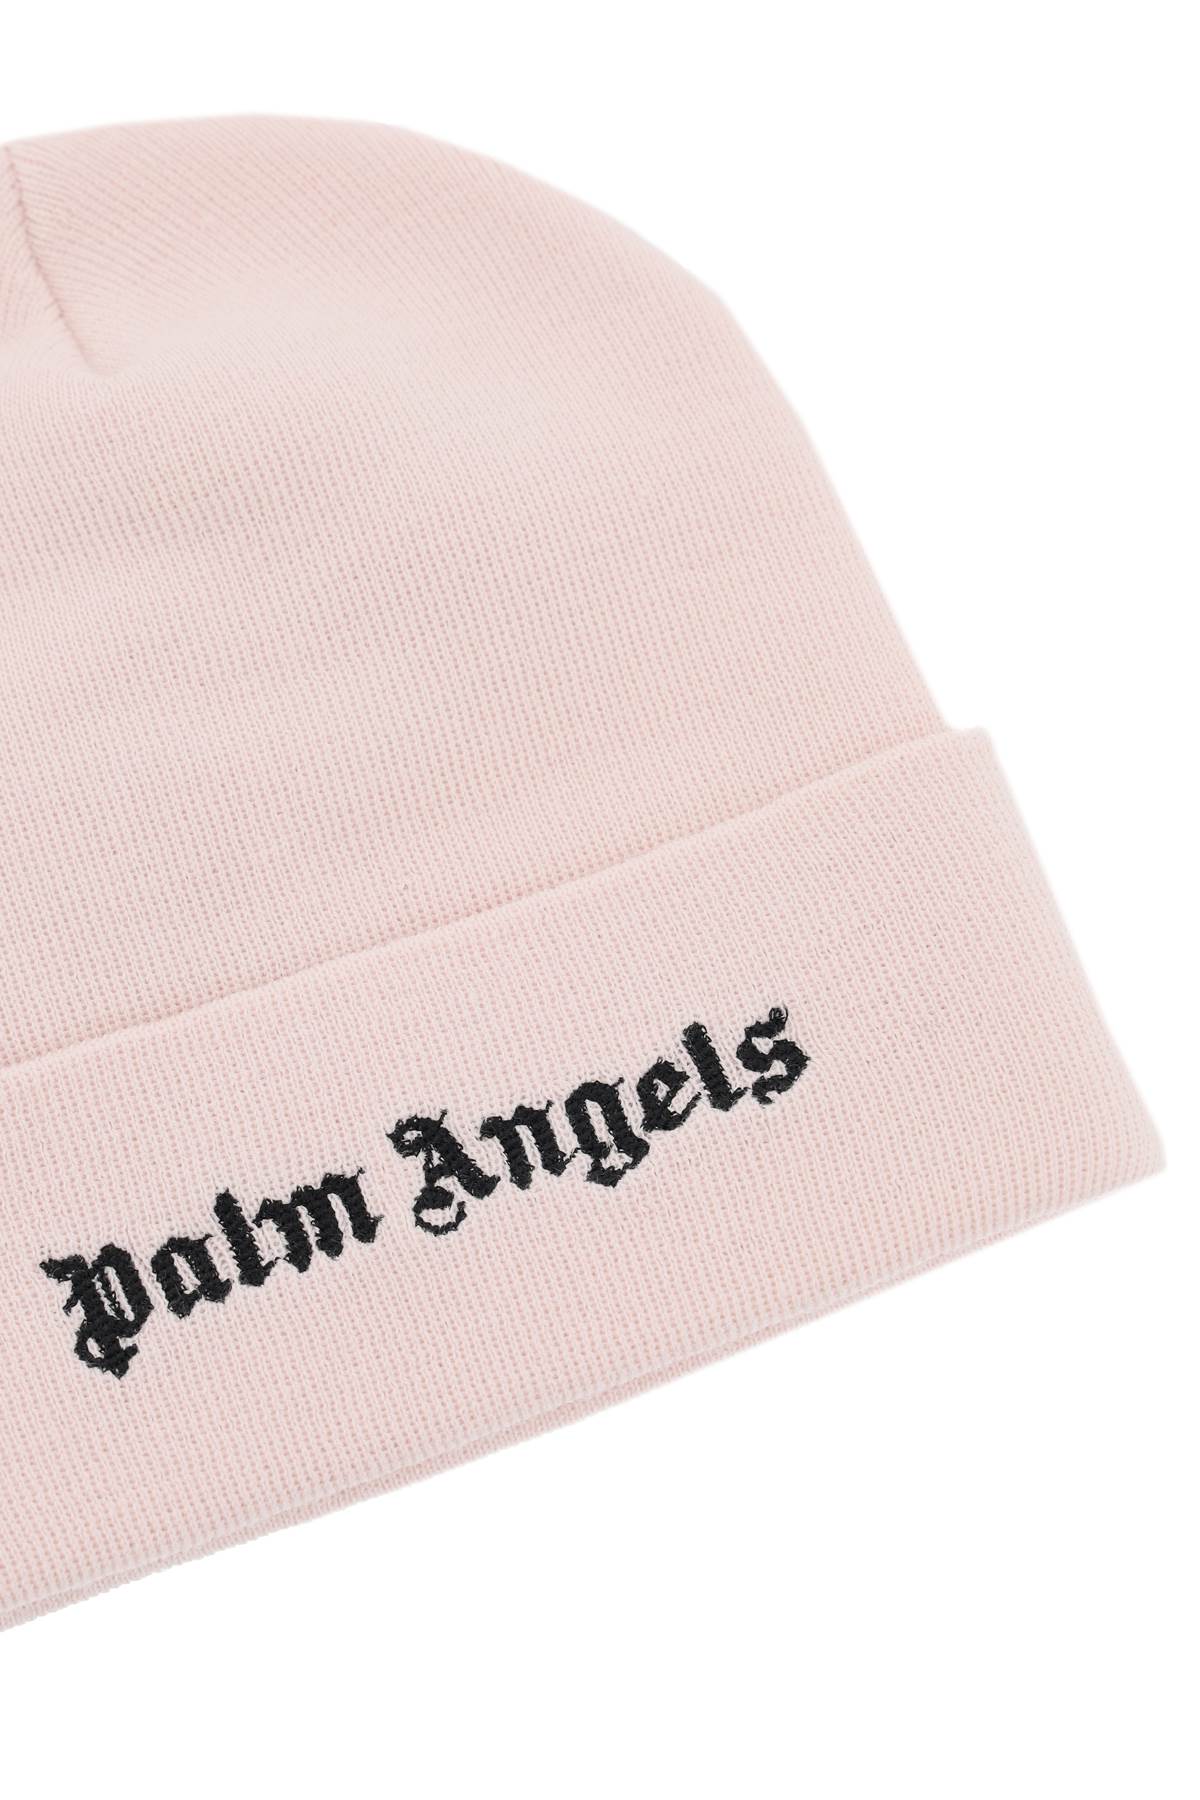 Palm Angels Palm angels embroidered logo beanie hat